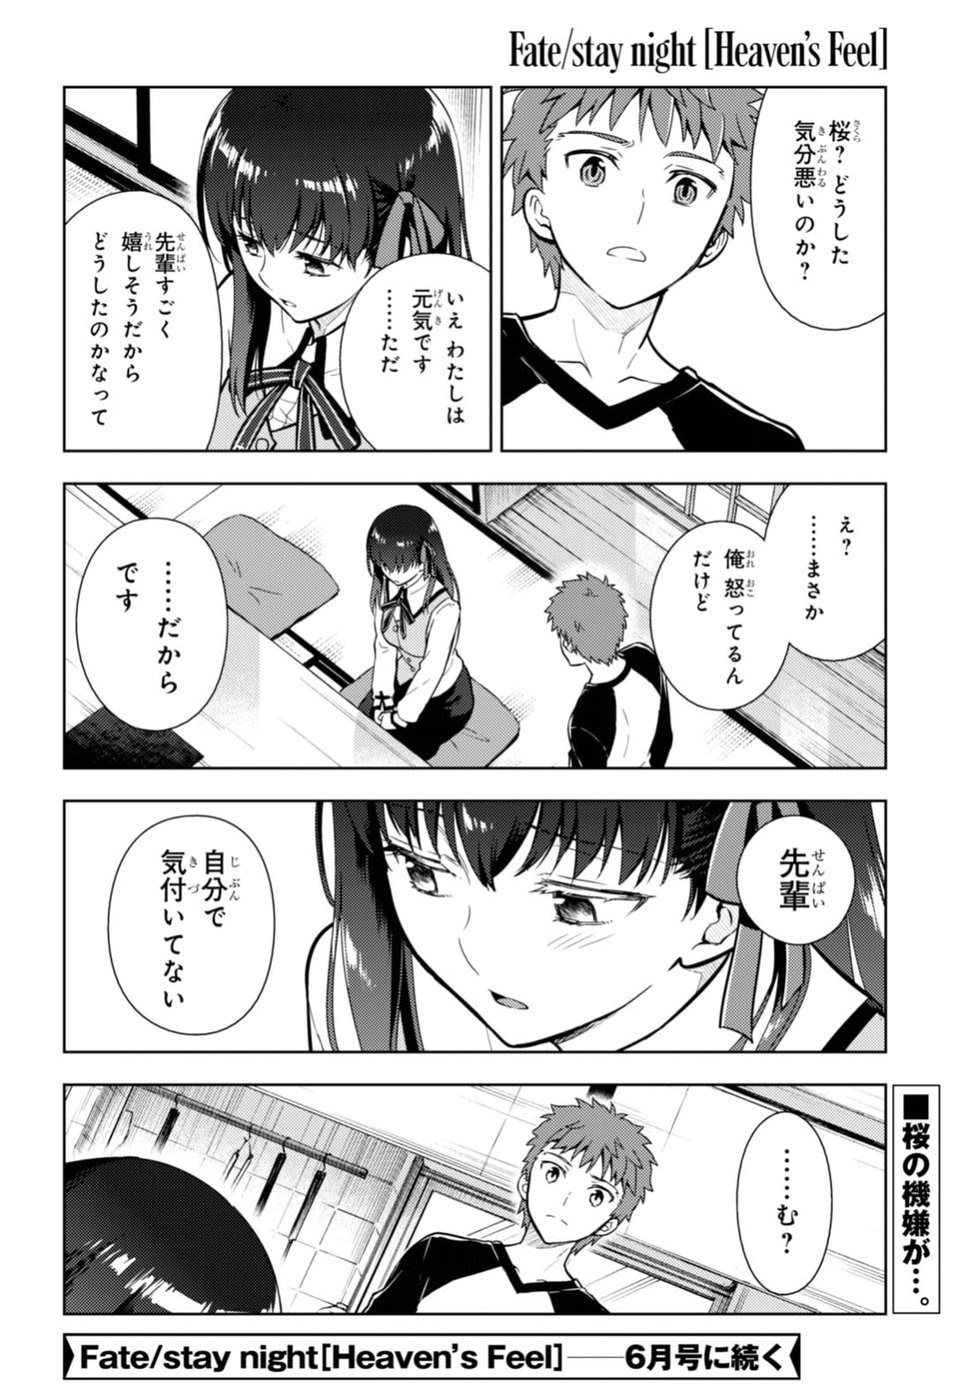 Fate/Stay night Heaven's Feel - Chapter 36 - Page 14